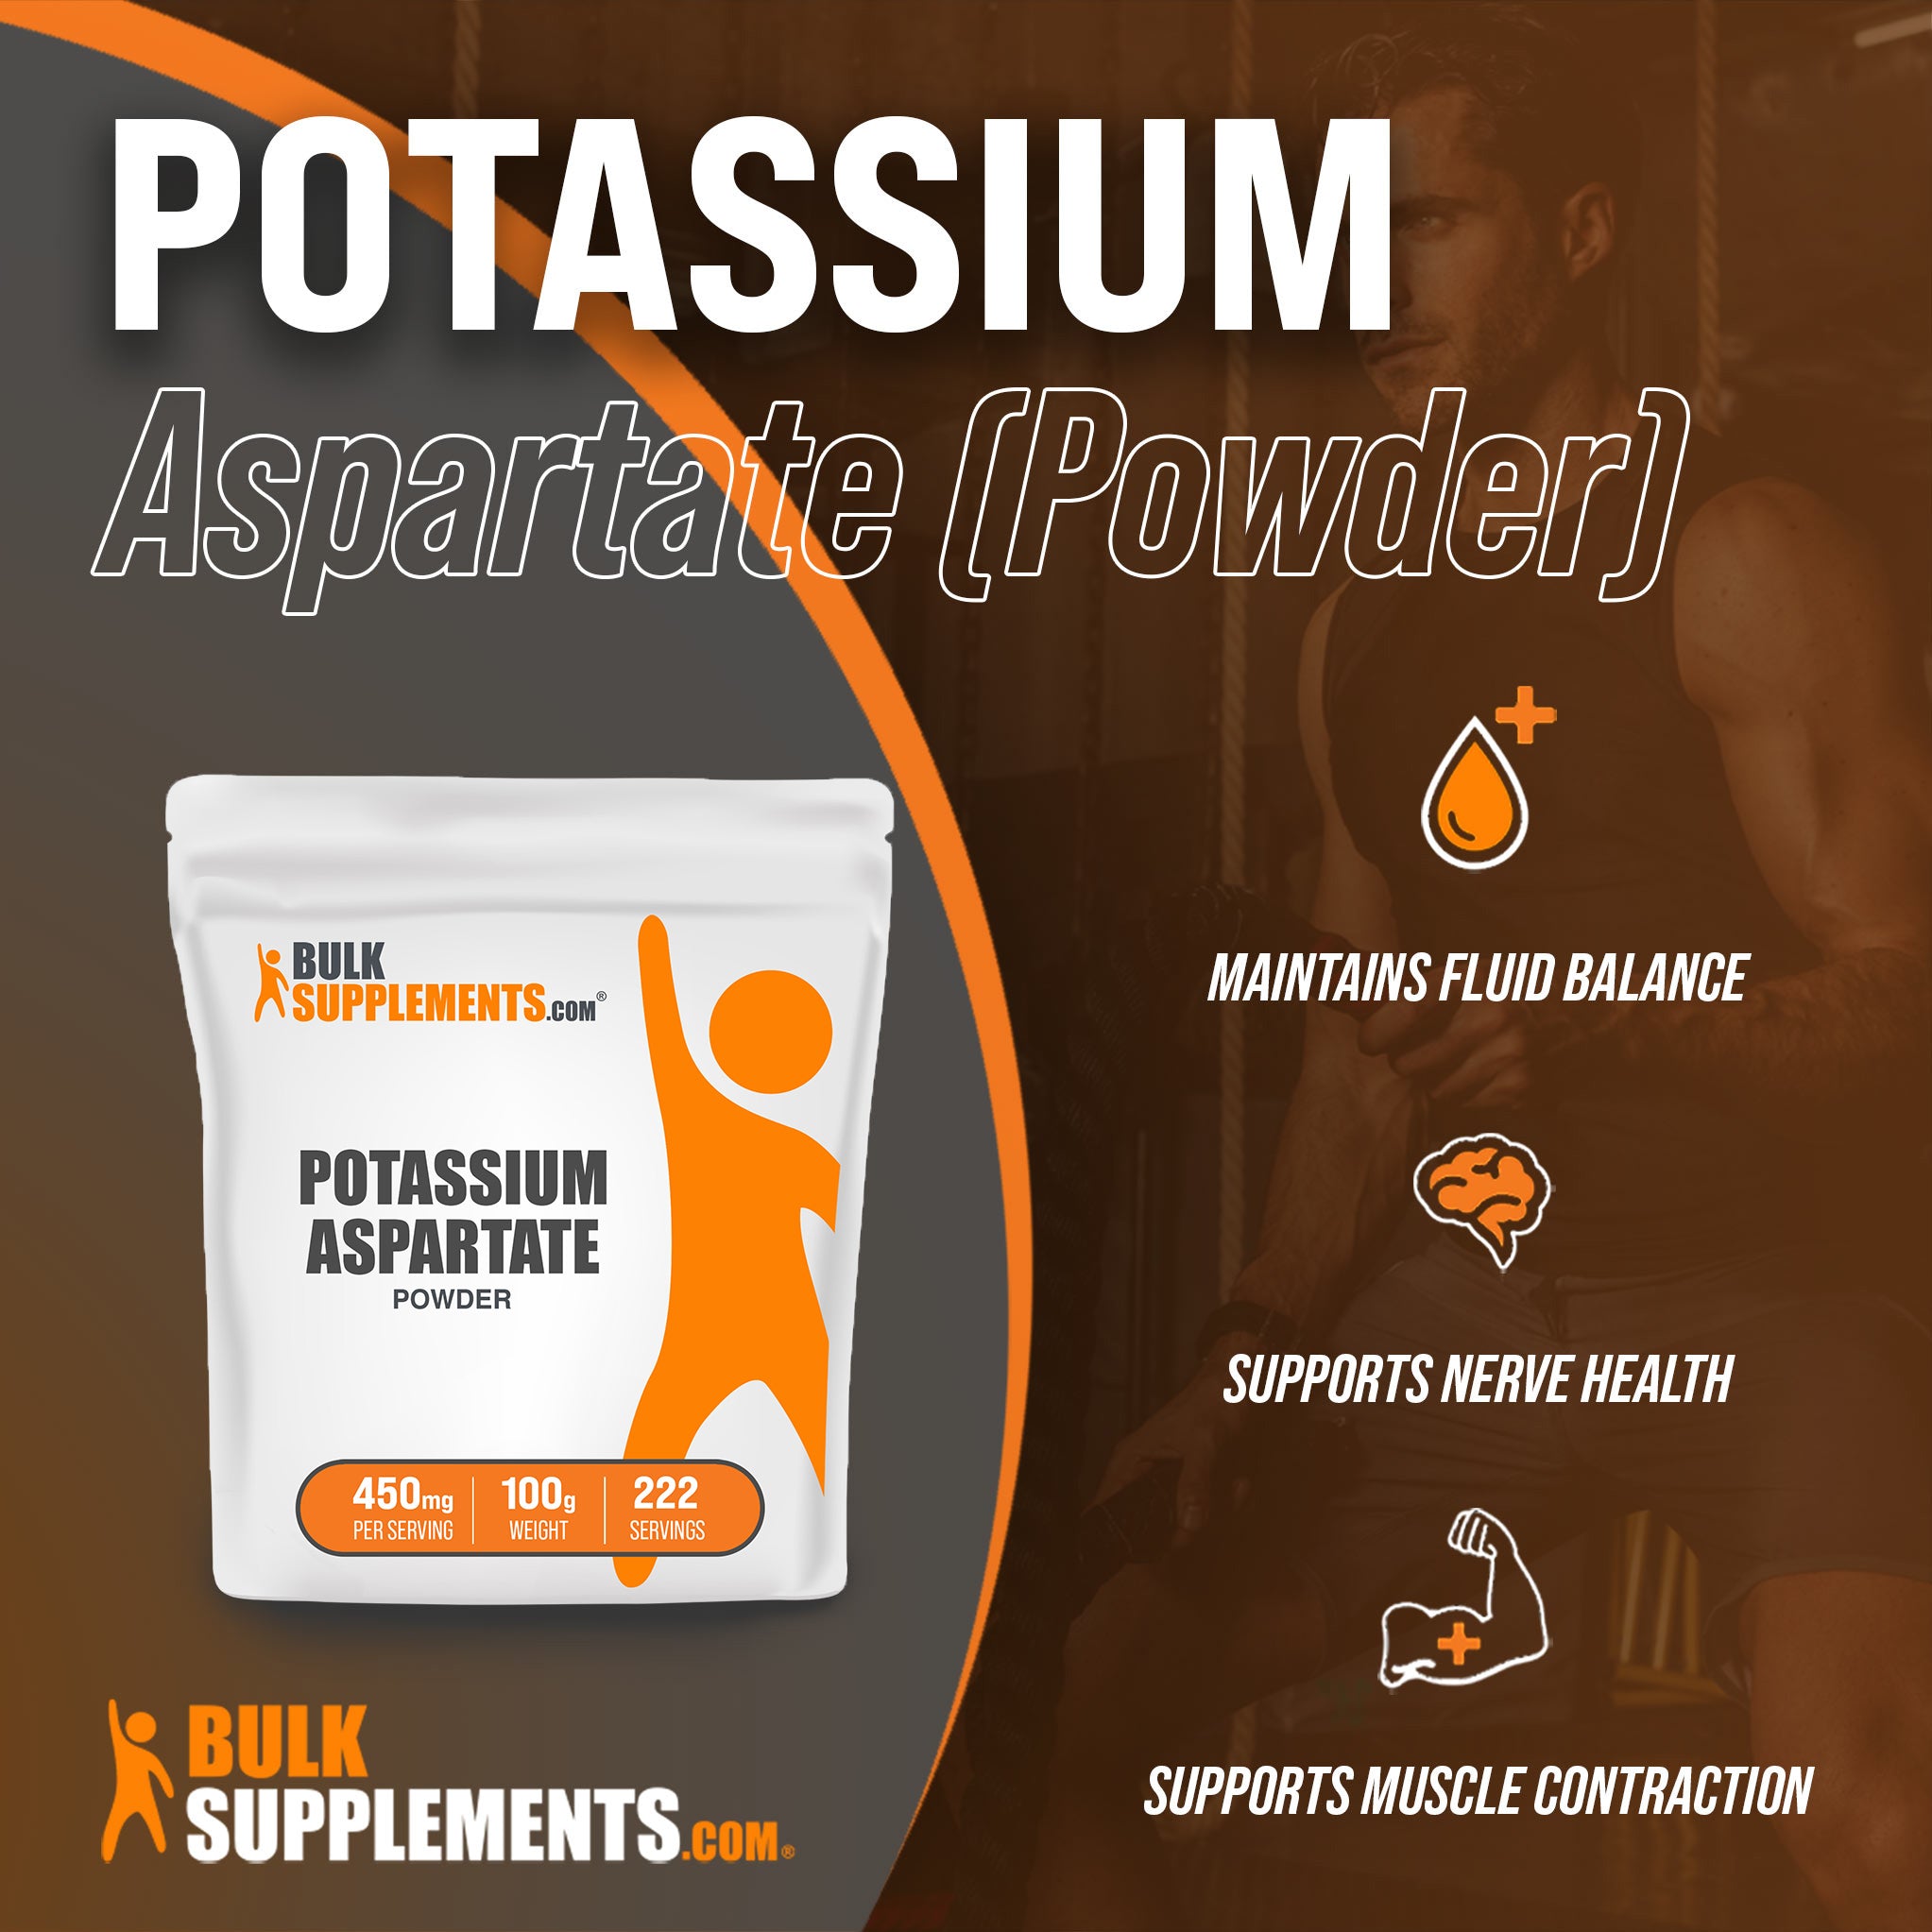 Benefits of Potassium Aspartate: maintains fluid balance, supports nerve health, supports muscle contraction